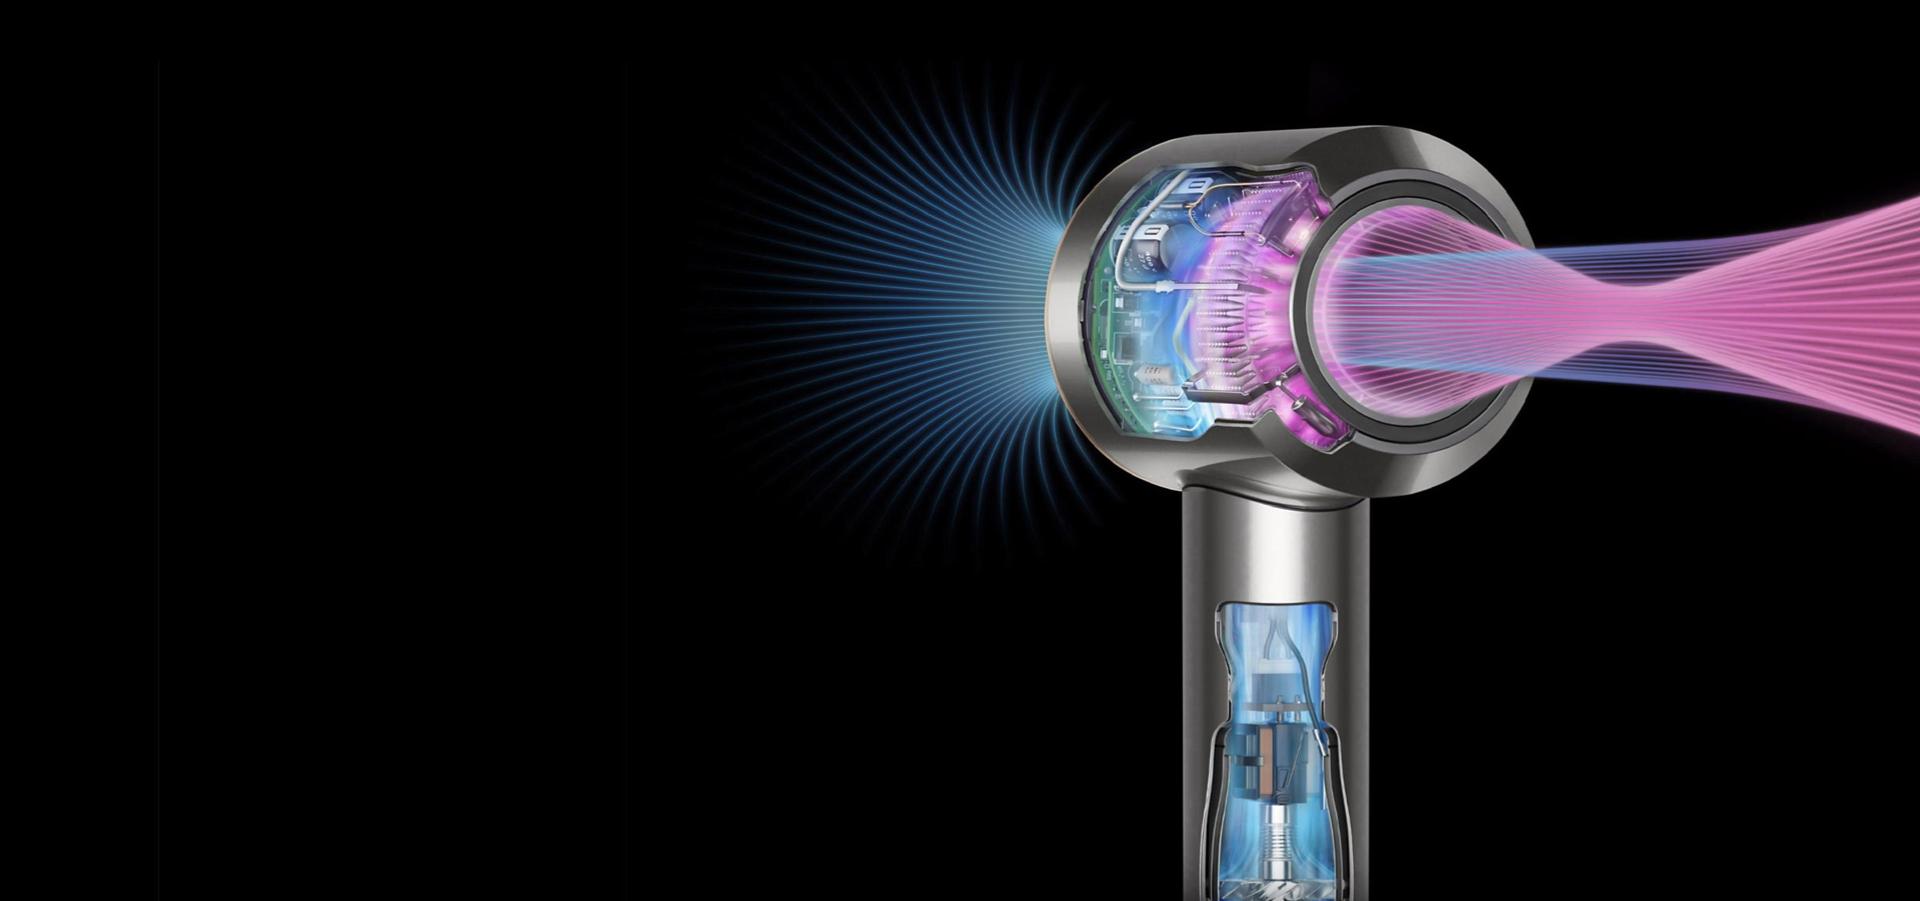 Sustainble technology within a Dyson Supersonic hair dryer.